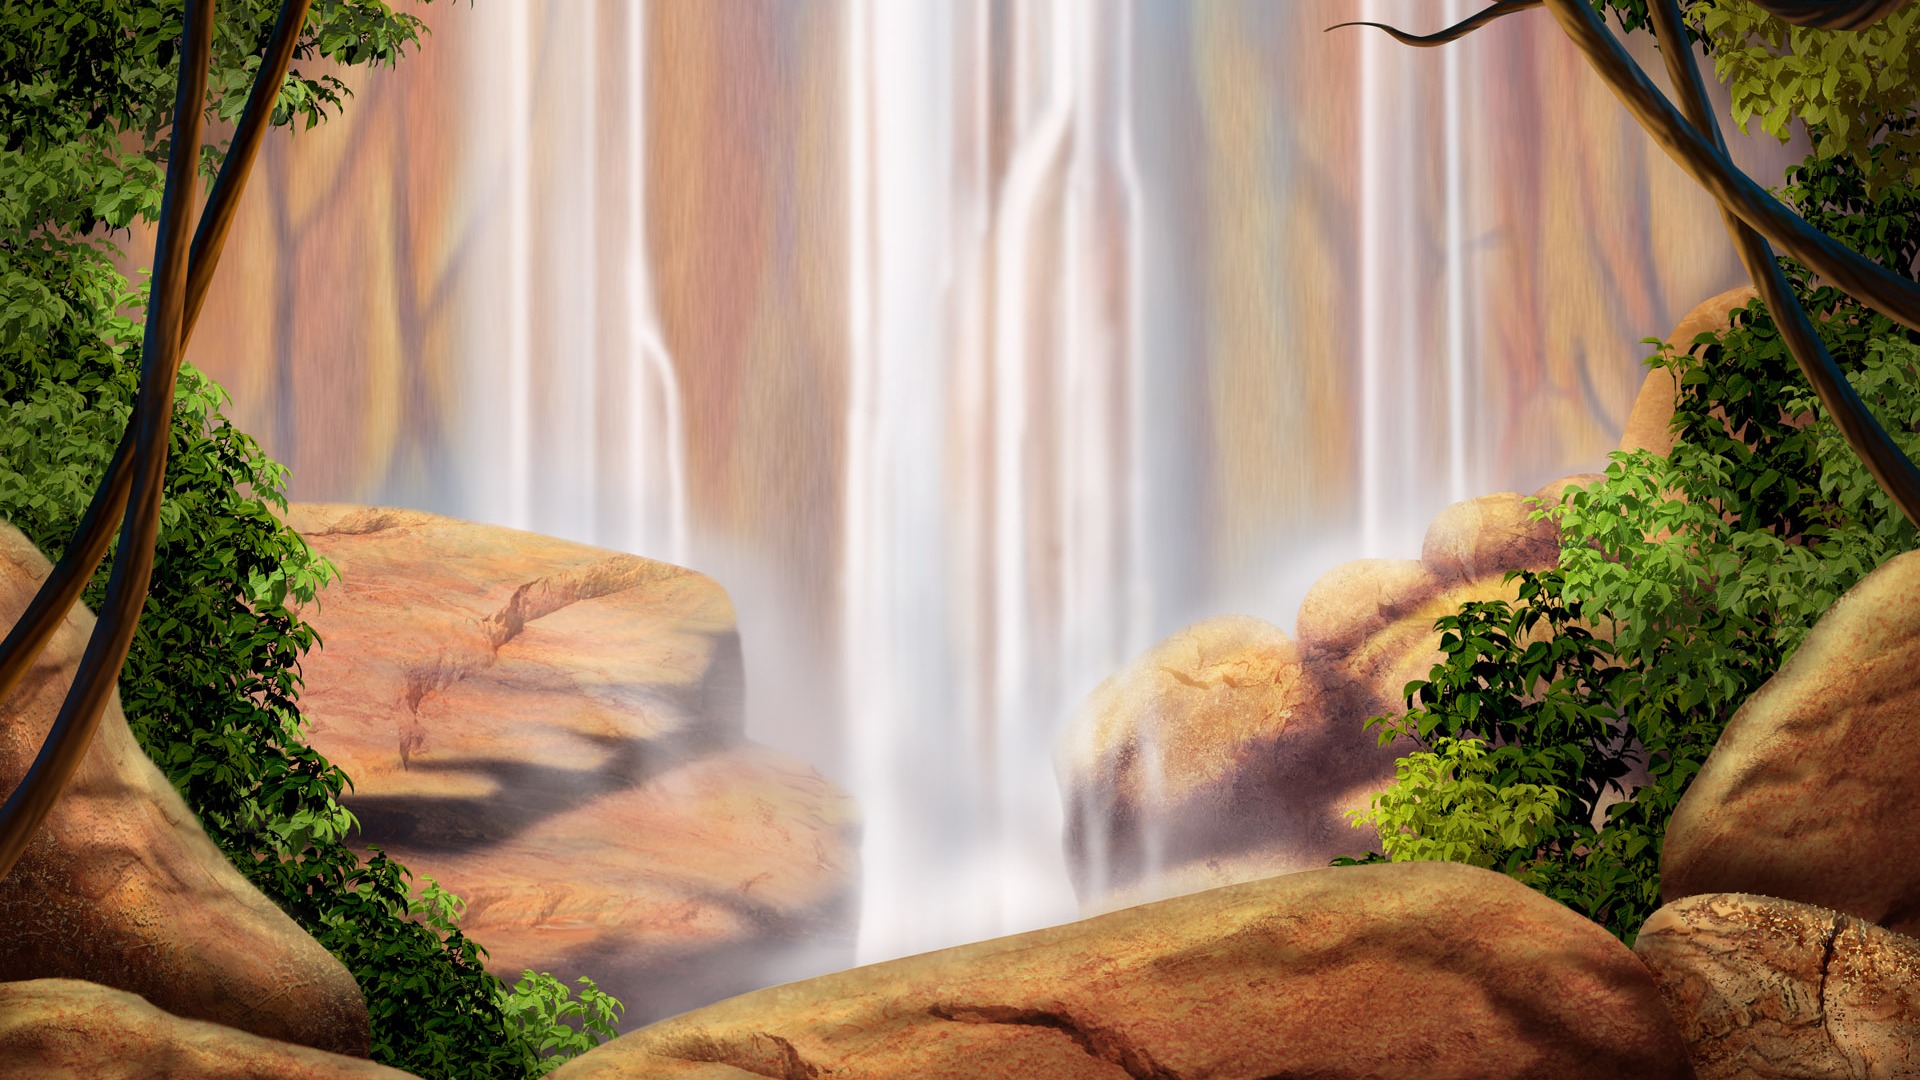 Colorful hand-painted wallpaper landscape ecology (2) #5 - 1920x1080